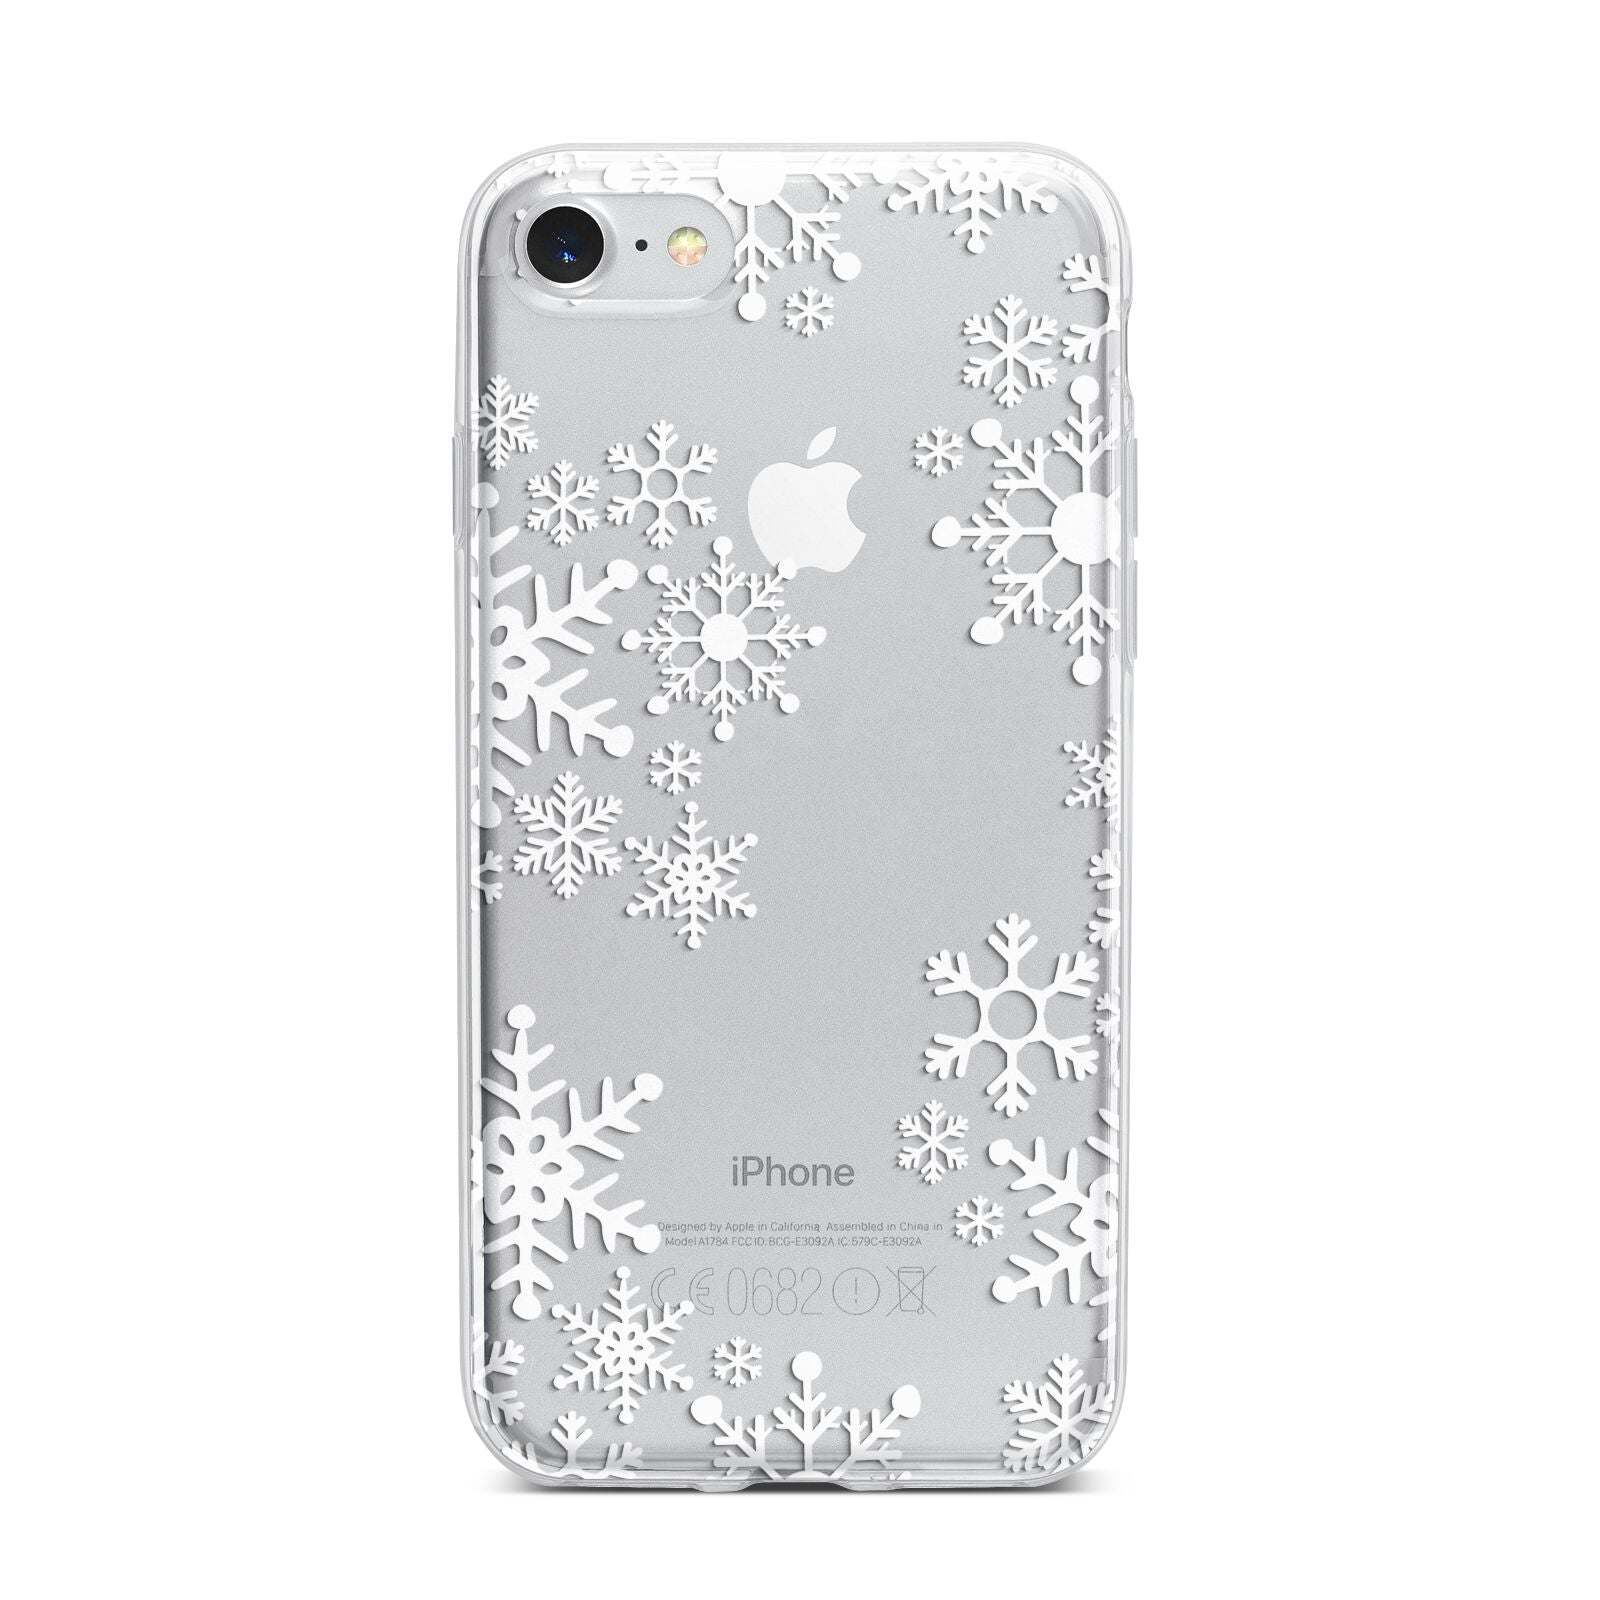 Snowflake iPhone 7 Bumper Case on Silver iPhone